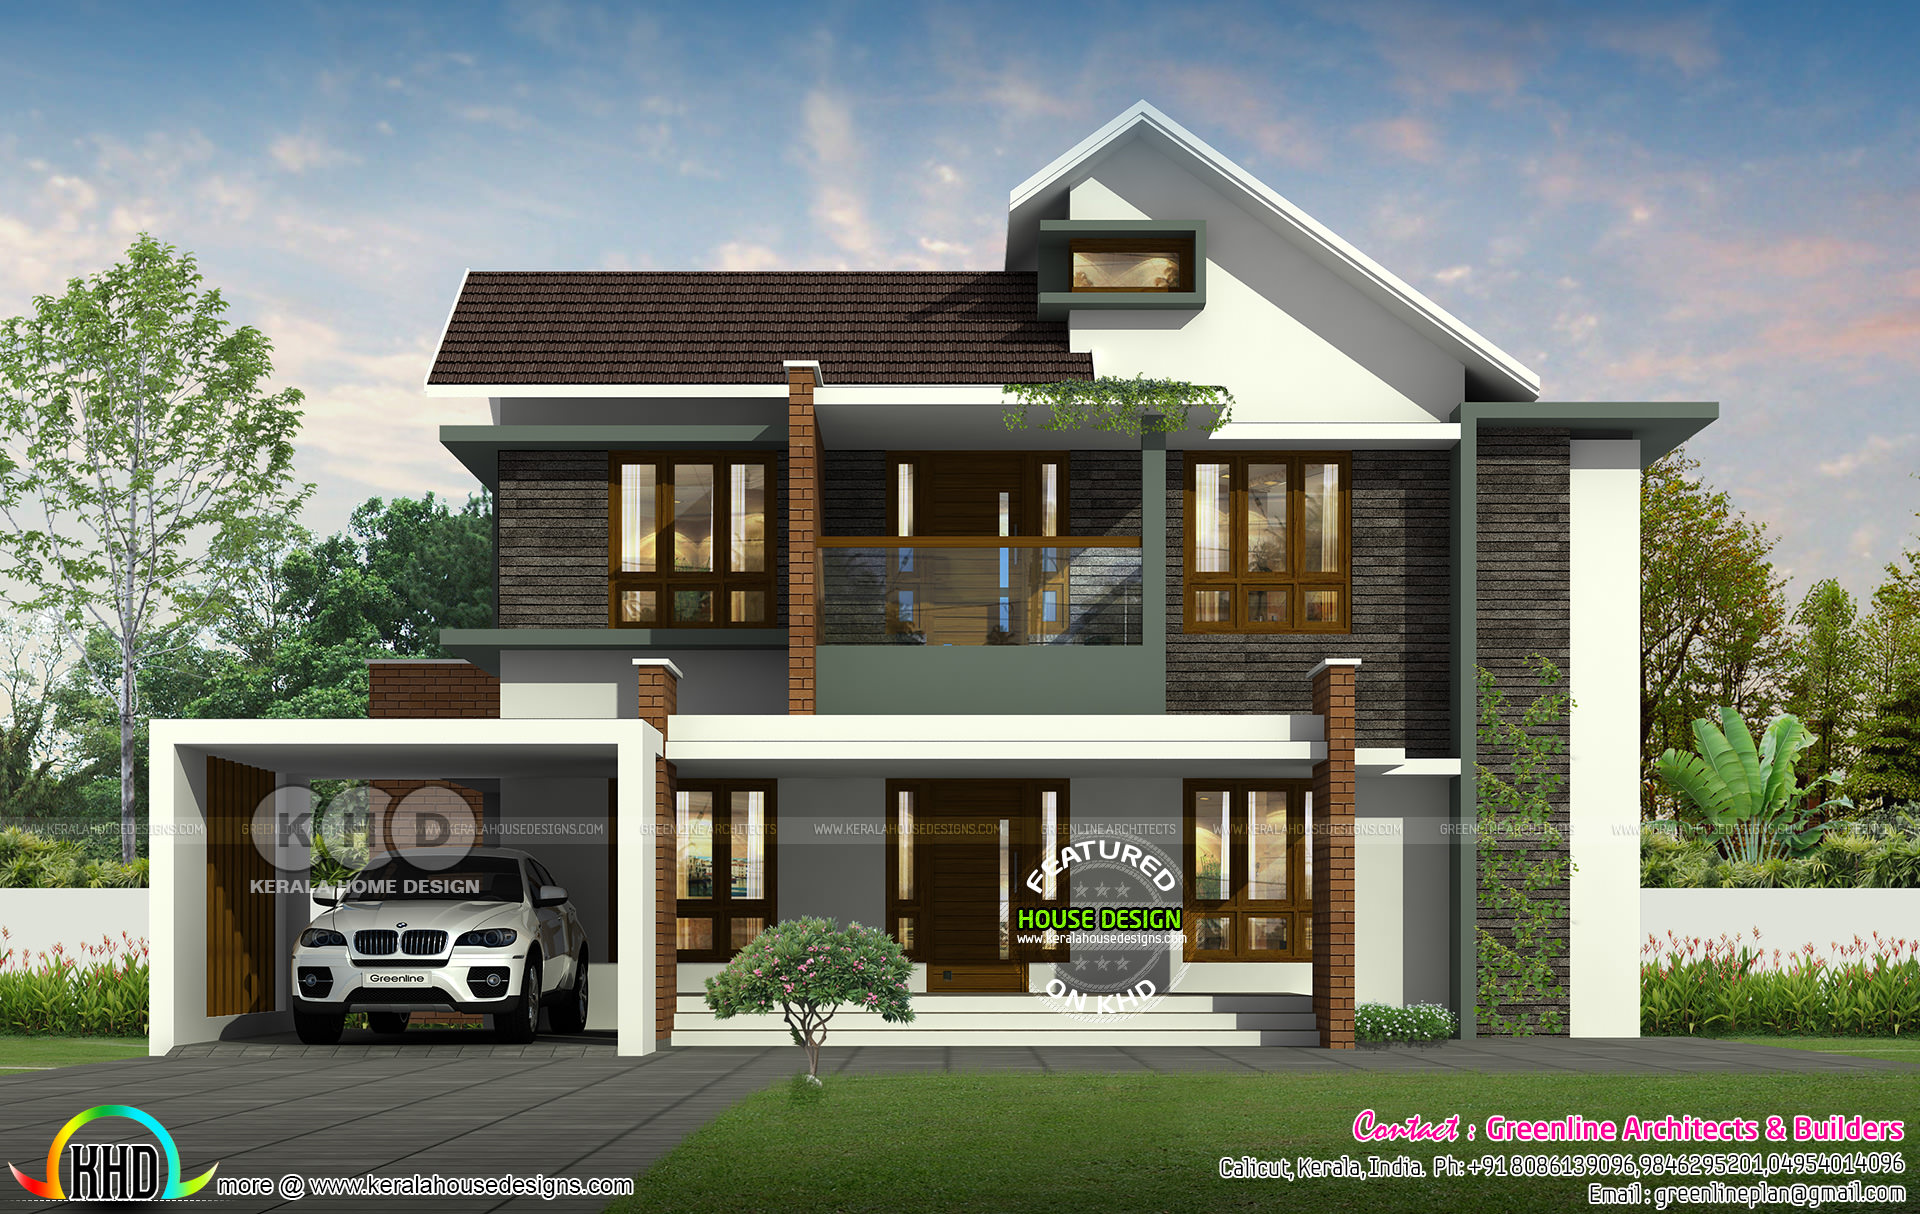  4  bedroom  2500 sq ft modern  contemporary  house  Kerala 